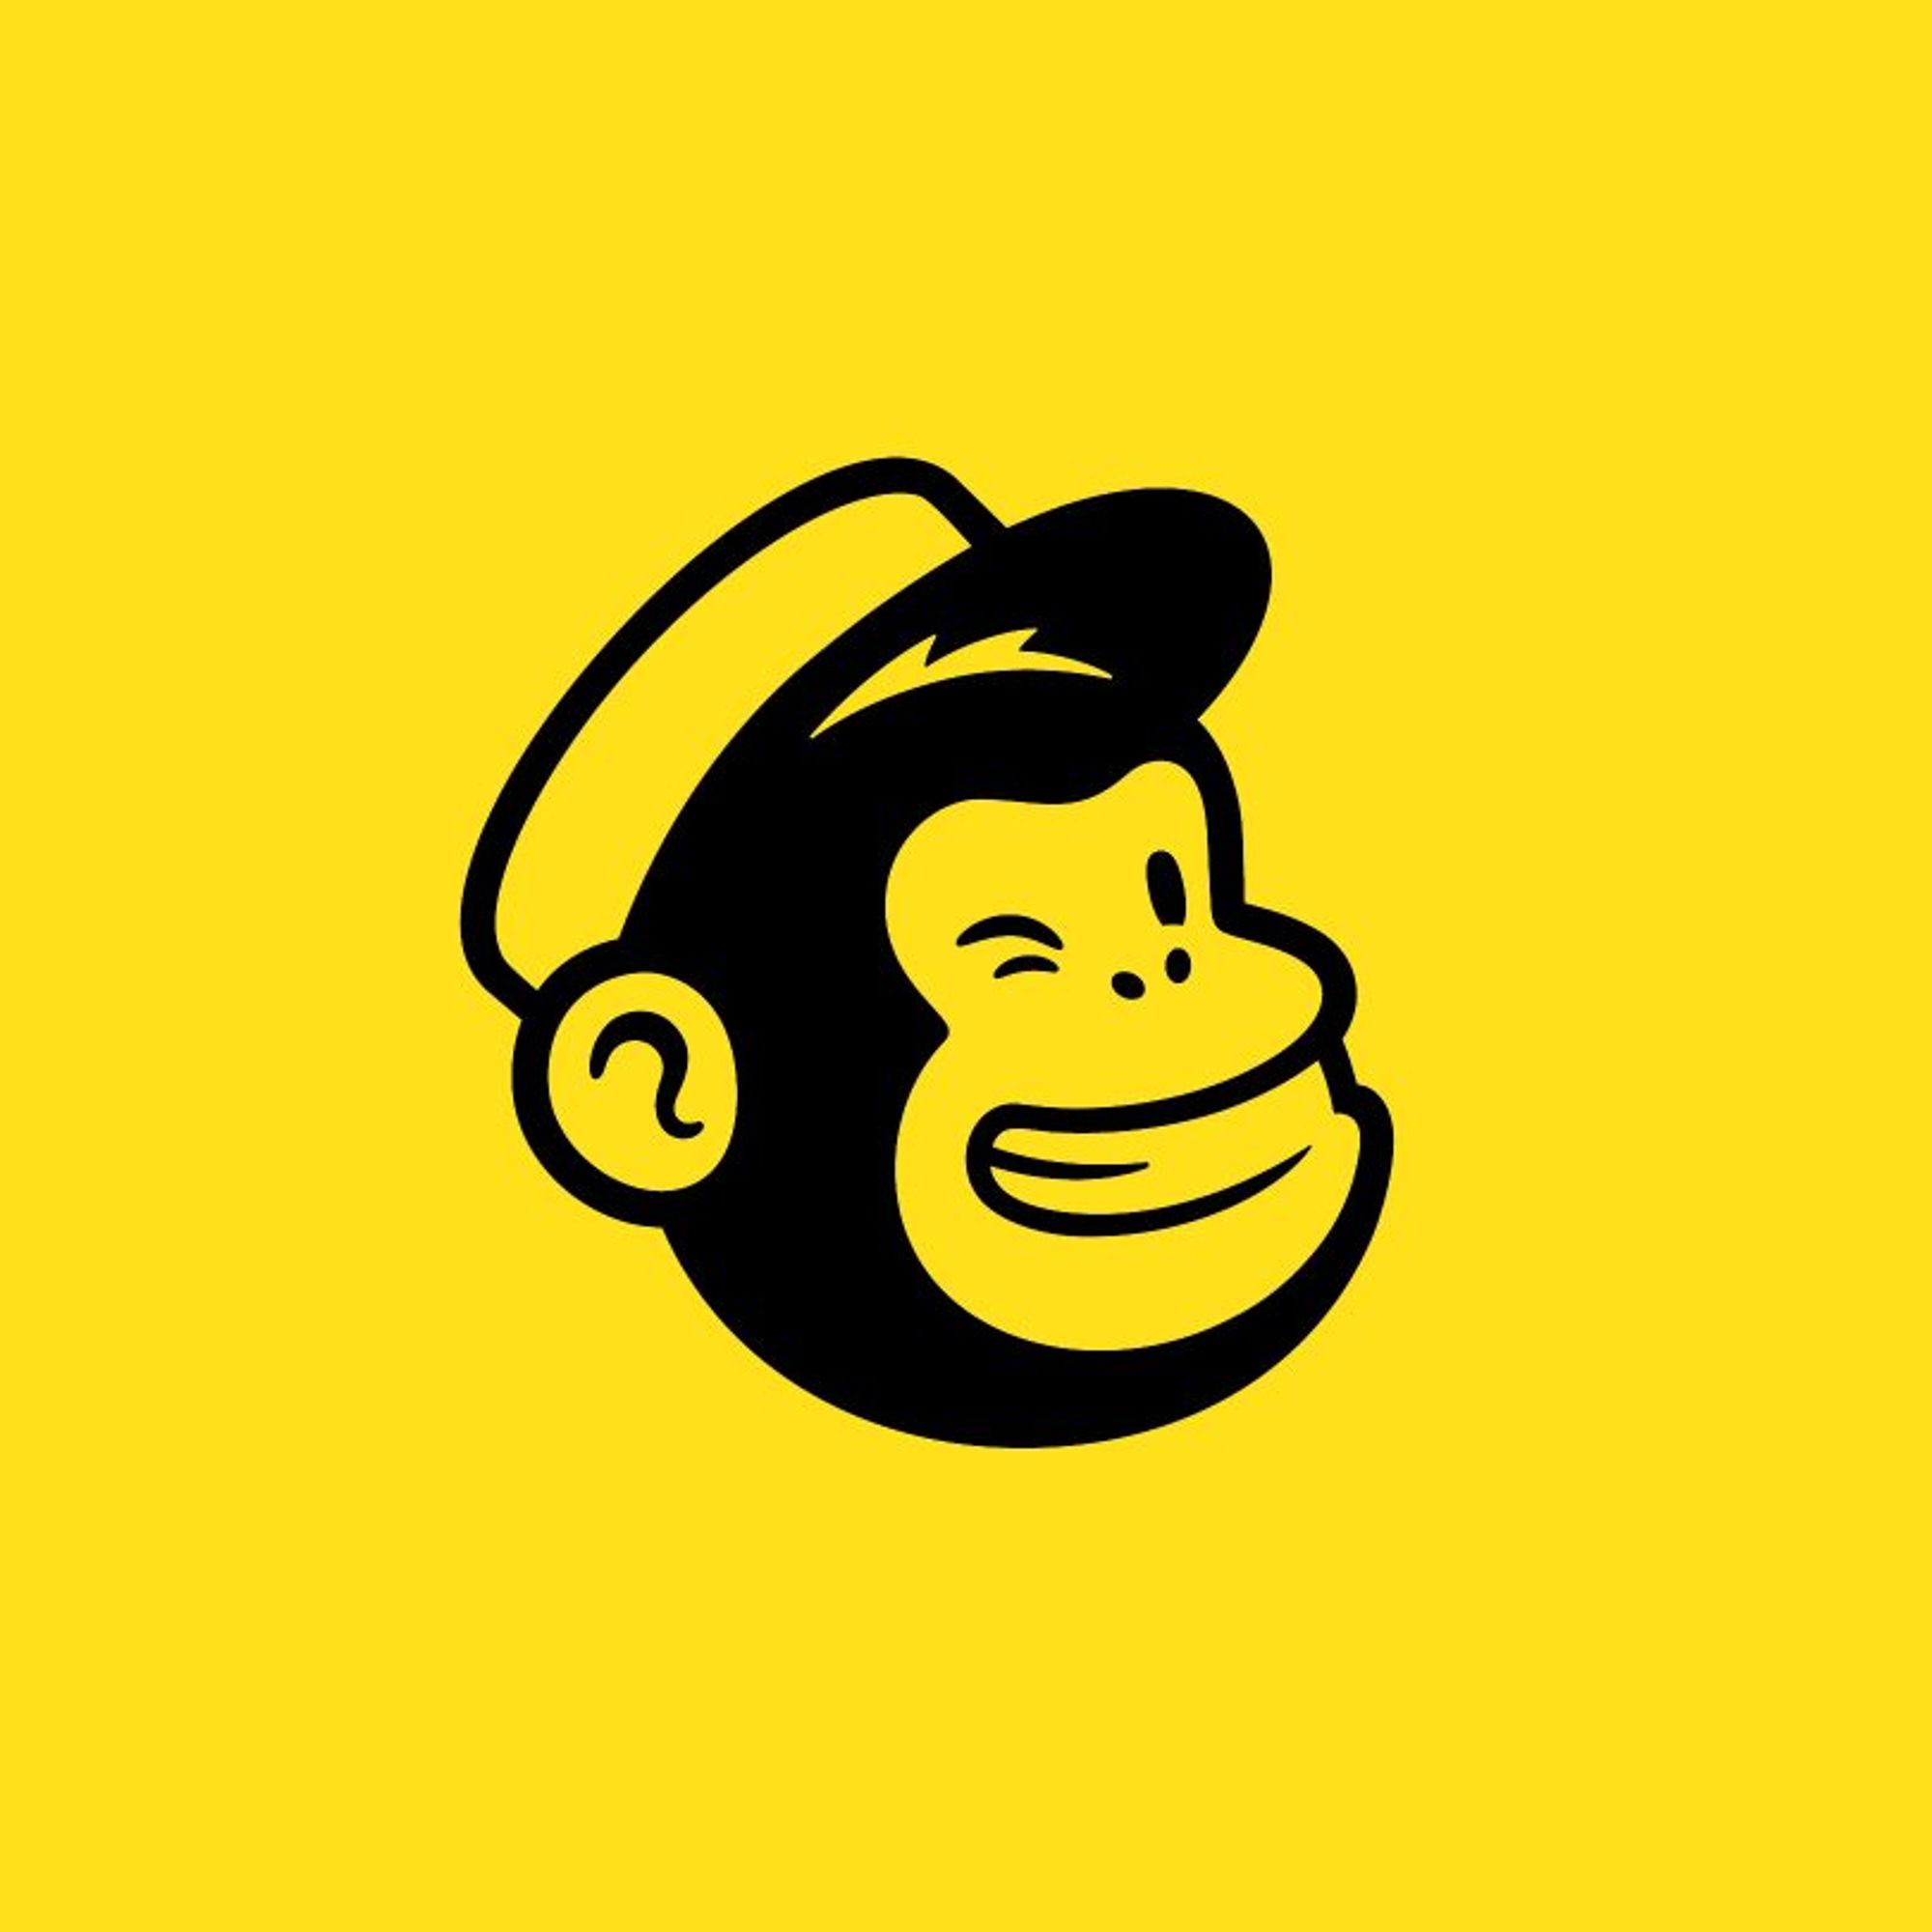 Connect your form to Mailchimp